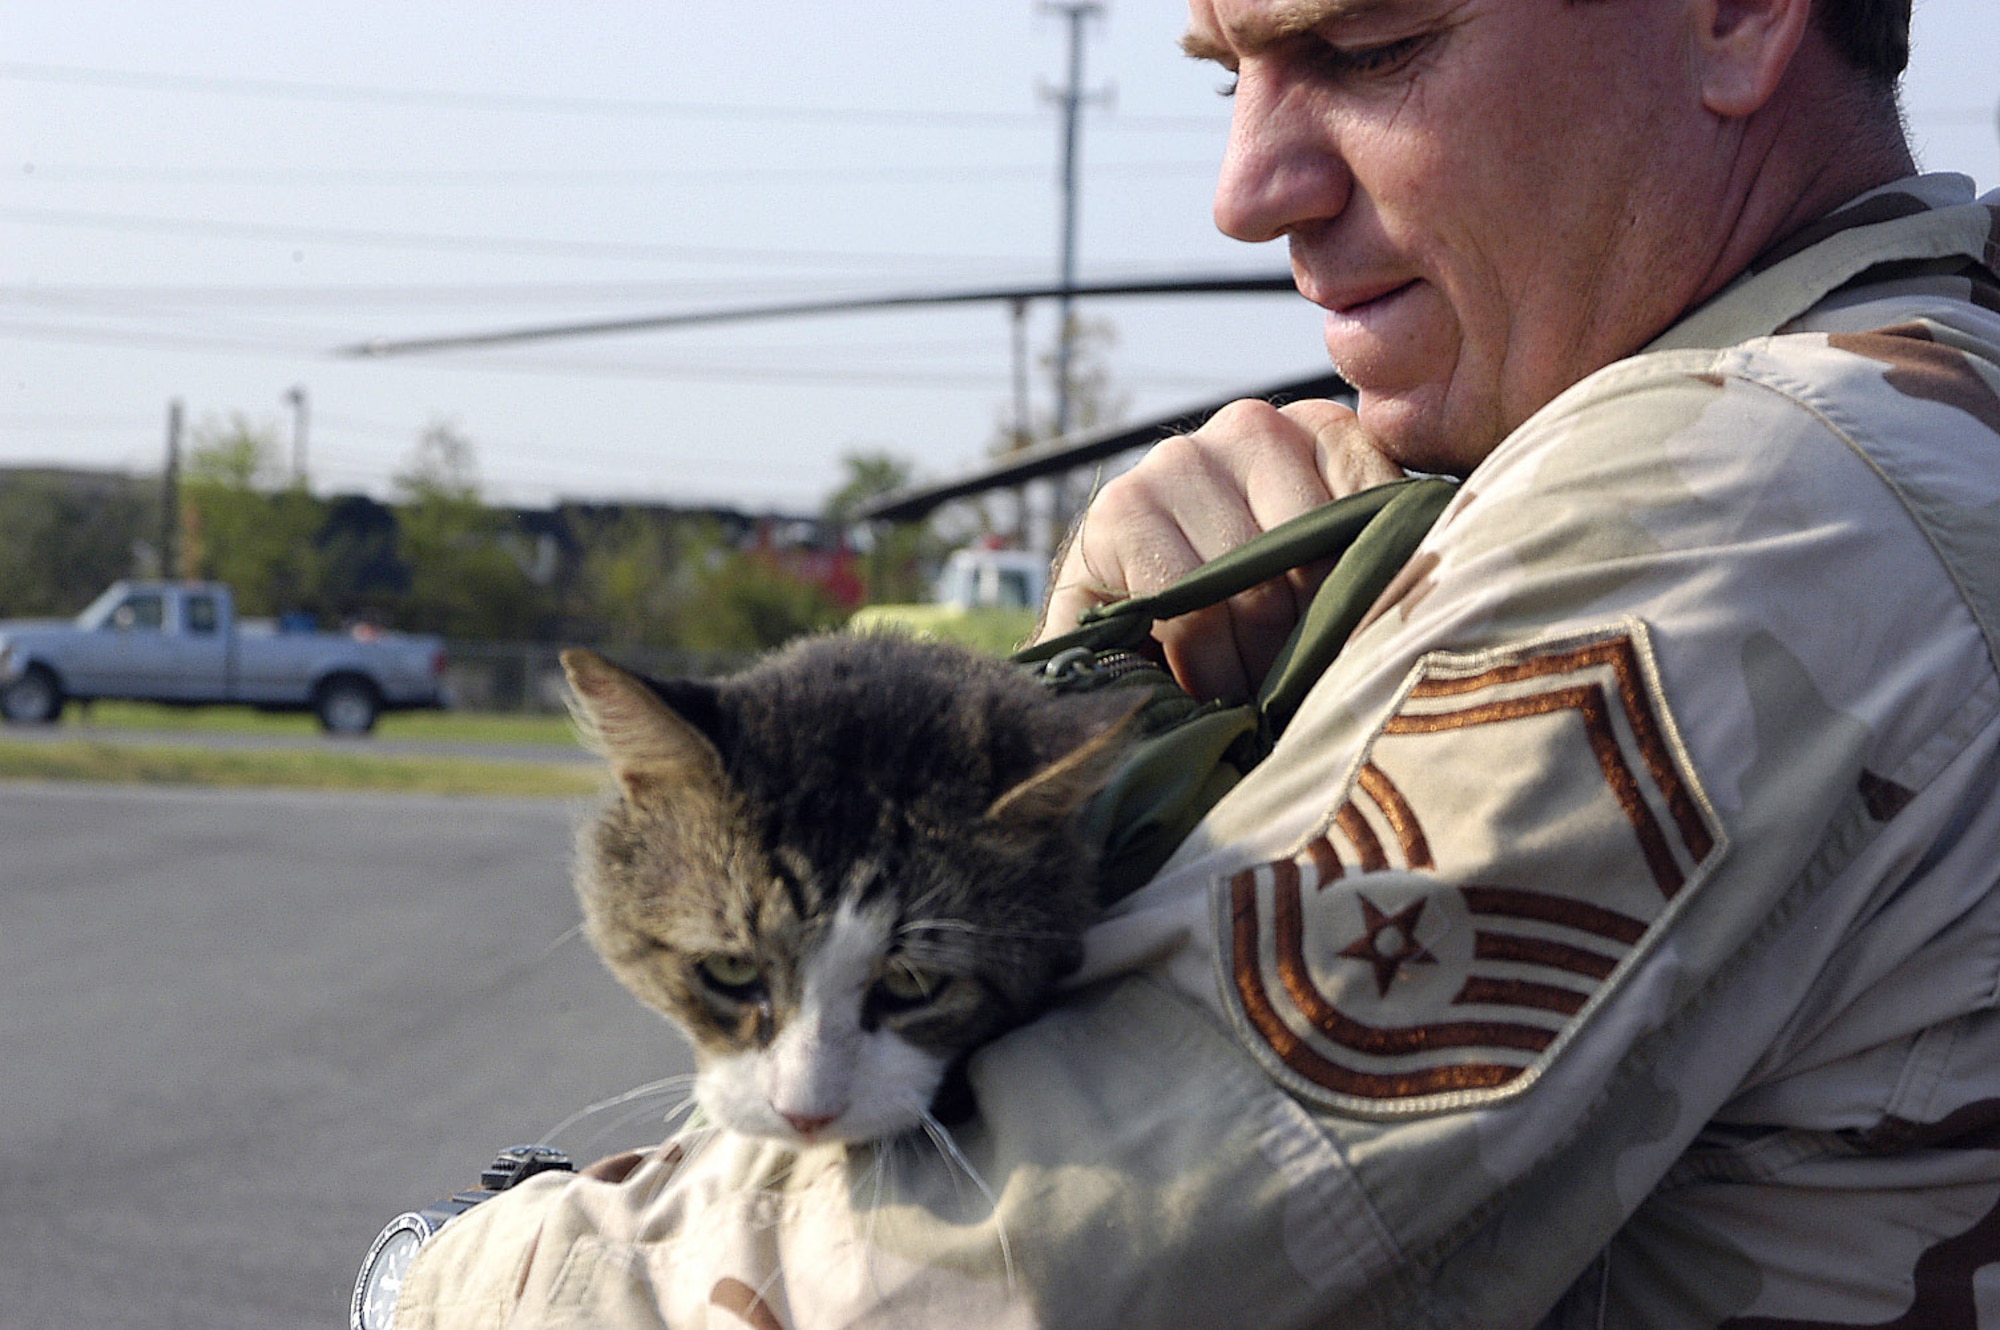 JACKSON, Miss. -- Senior Master Sgt. James Sanchez carries a cat he rescued from the second floor of a flooded house in New Orleans.  The cat, which he named PJ, is one of 22 cats he has saved during rescue missions in support of Hurricane Katrina relief operations.  Sergeant Sanchez is a pararescueman with the 306th Rescue Squadron from Davis-Monthan Air Force Base, Ariz. (U.S. Air Force photo by Senior Master Sgt. Elaine Mayo)